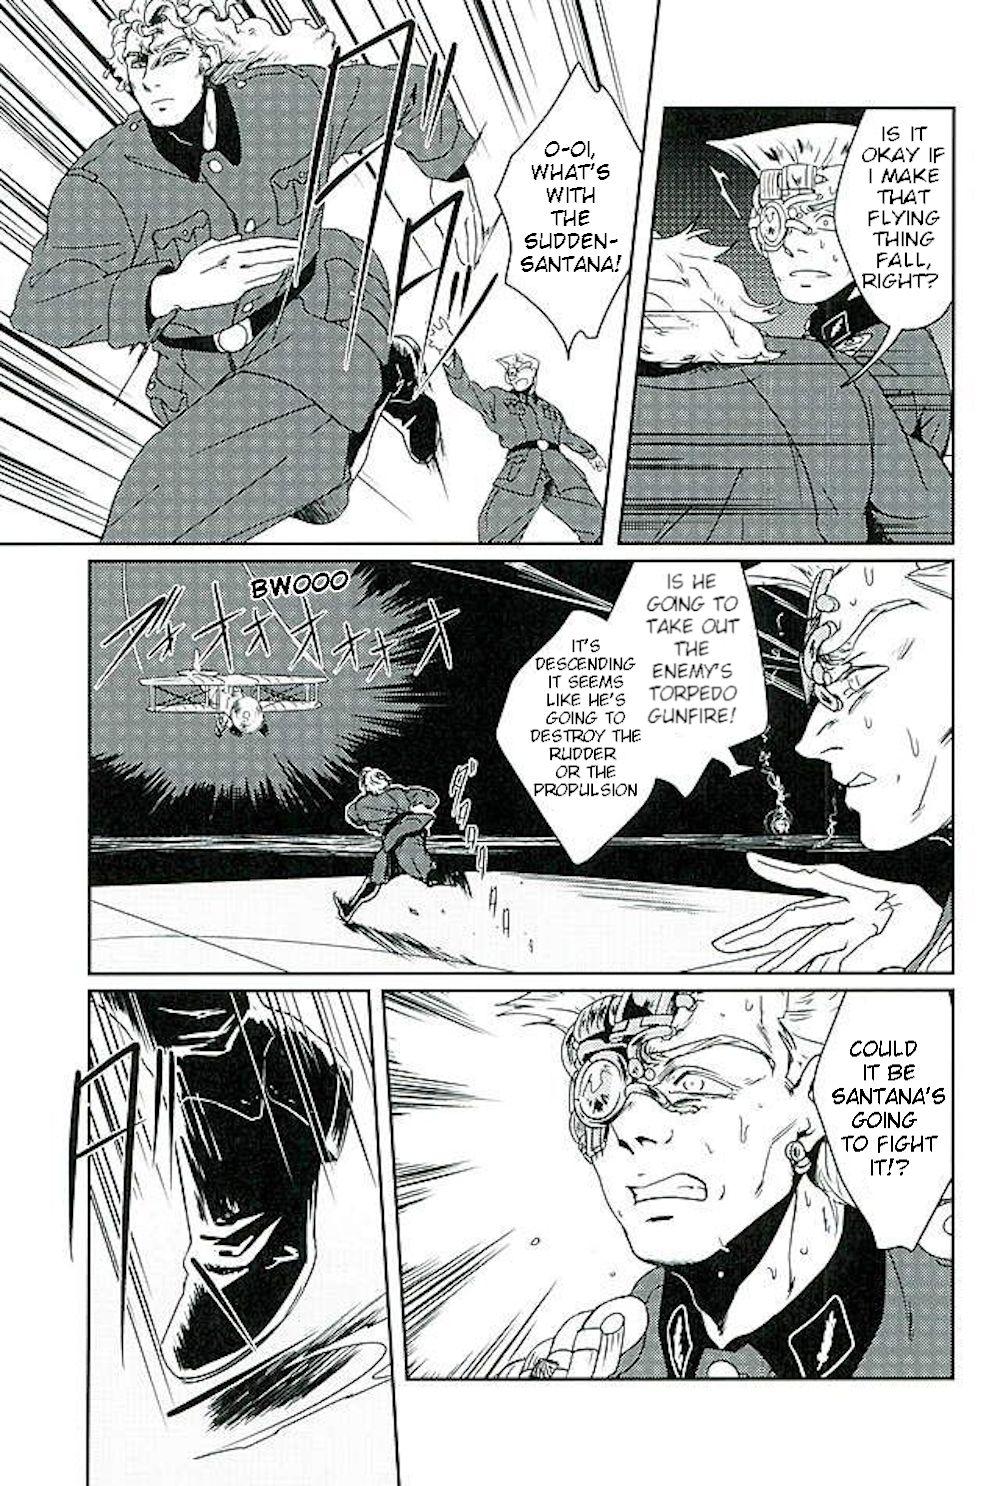 Point Of View Our Country's Strongest Weapon - Jojos bizarre adventure | jojo no kimyou na bouken Hugecock - Page 9